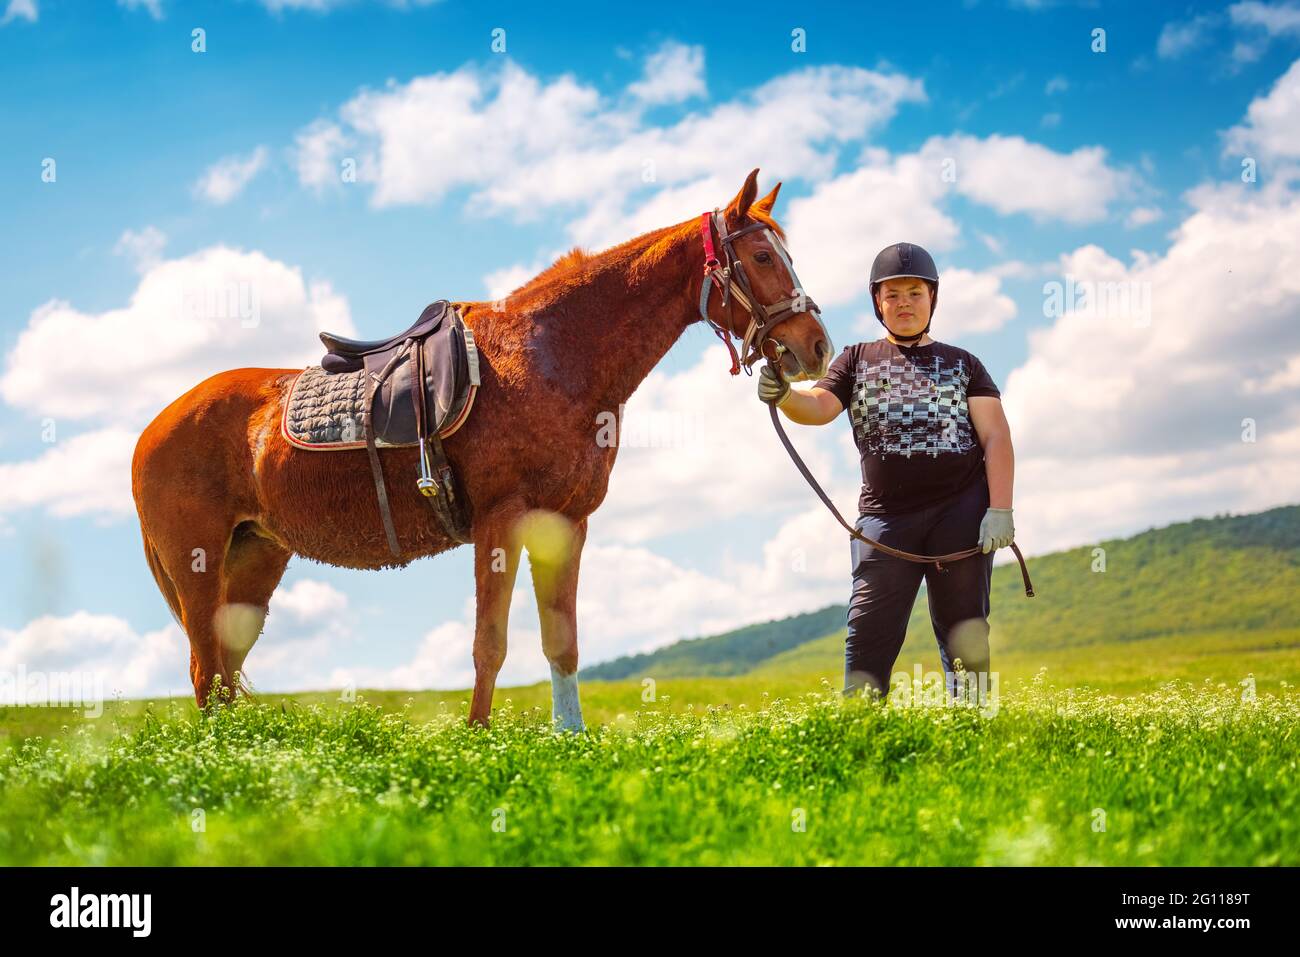 Young Boy riding a horse in the field Stock Photo